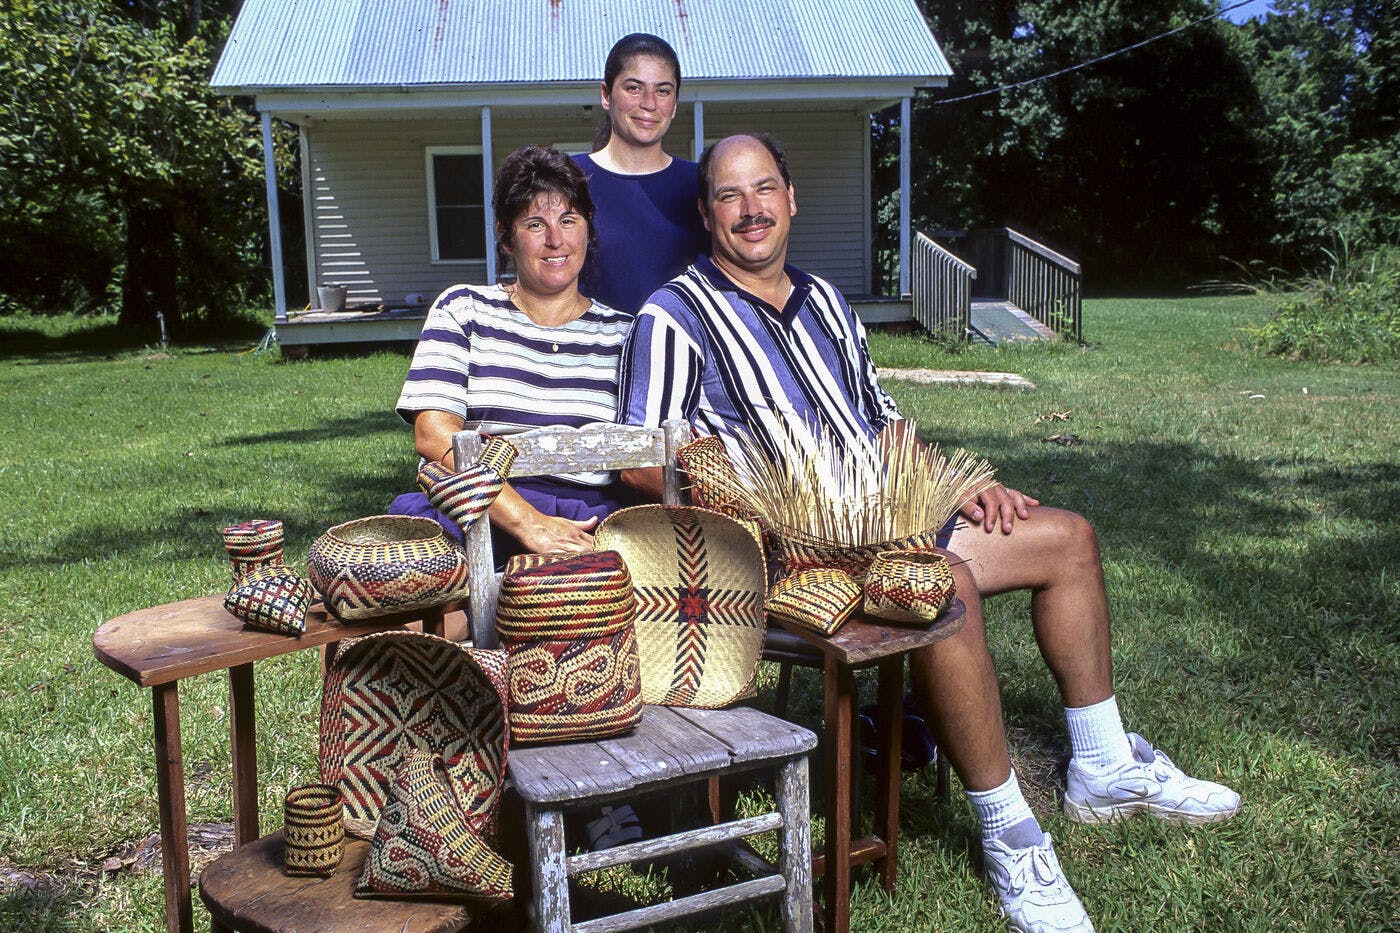 Three Chitimacha Triberibal members, one standing and two seated with some of their baskets on wooden furniture in front of a small house.